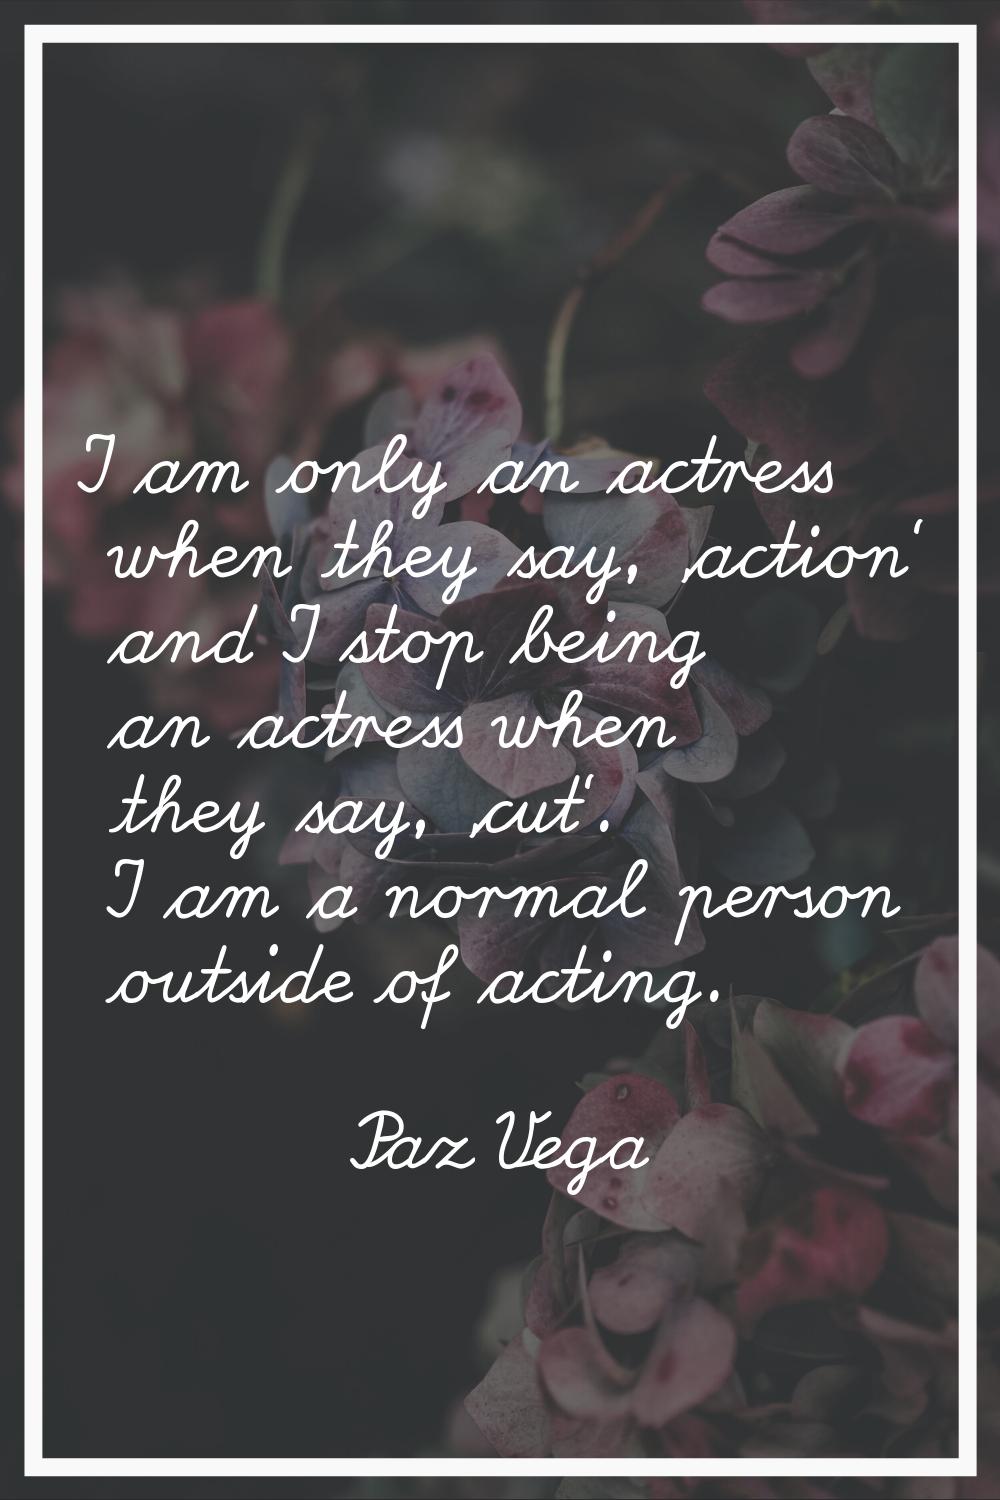 I am only an actress when they say, 'action' and I stop being an actress when they say, 'cut'. I am